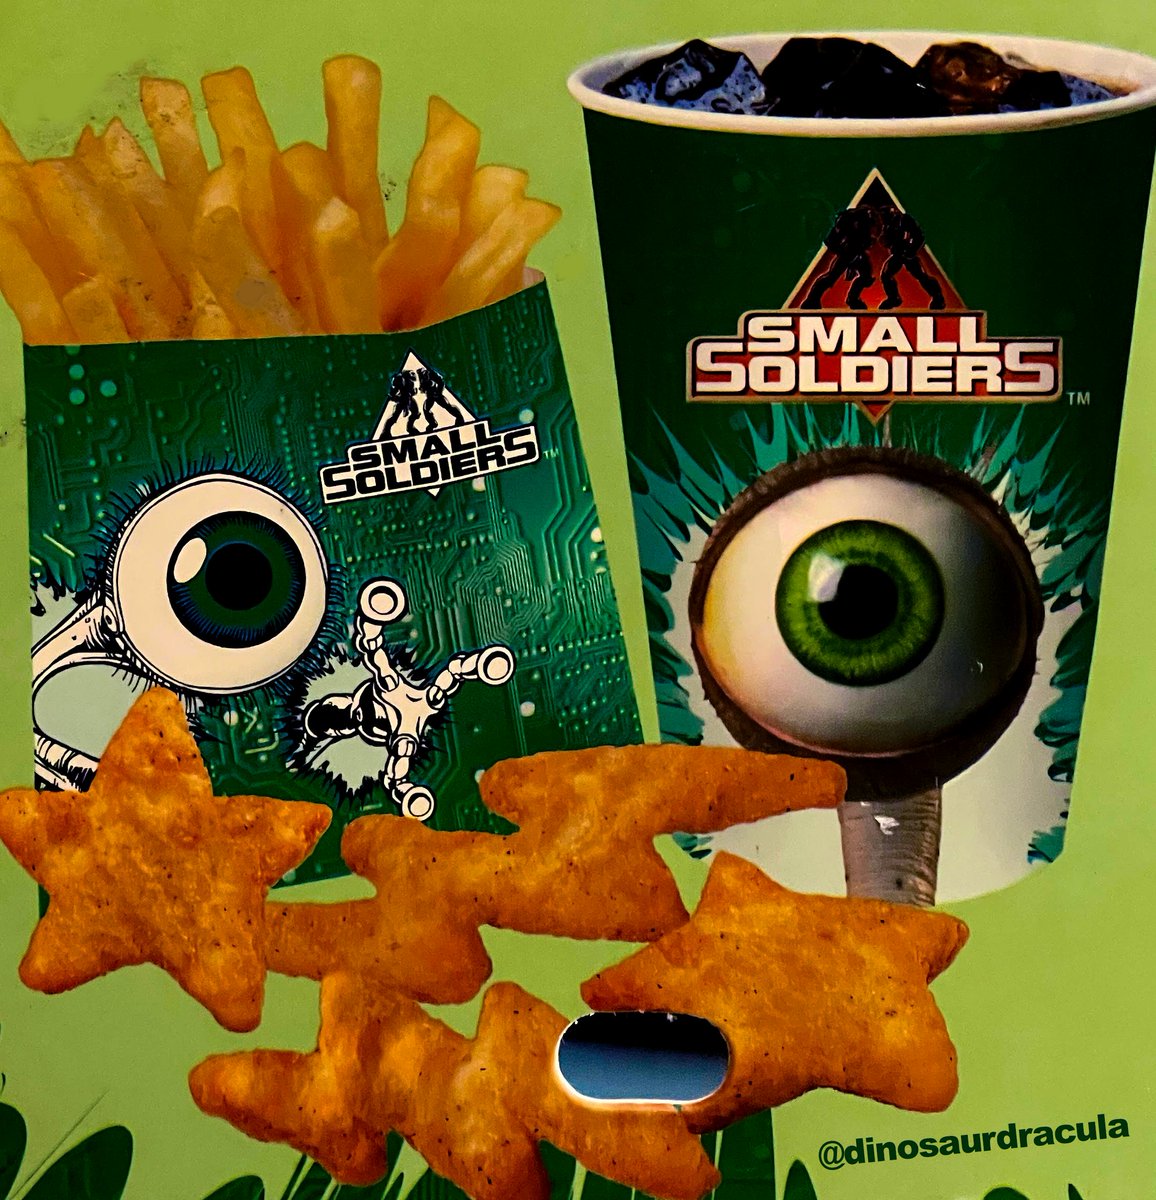 Small Soldiers Burger King Kids Meal, from 1998. Note the star and lightning-shaped chicken tenders, which according to some were meant to be worn as earrings.